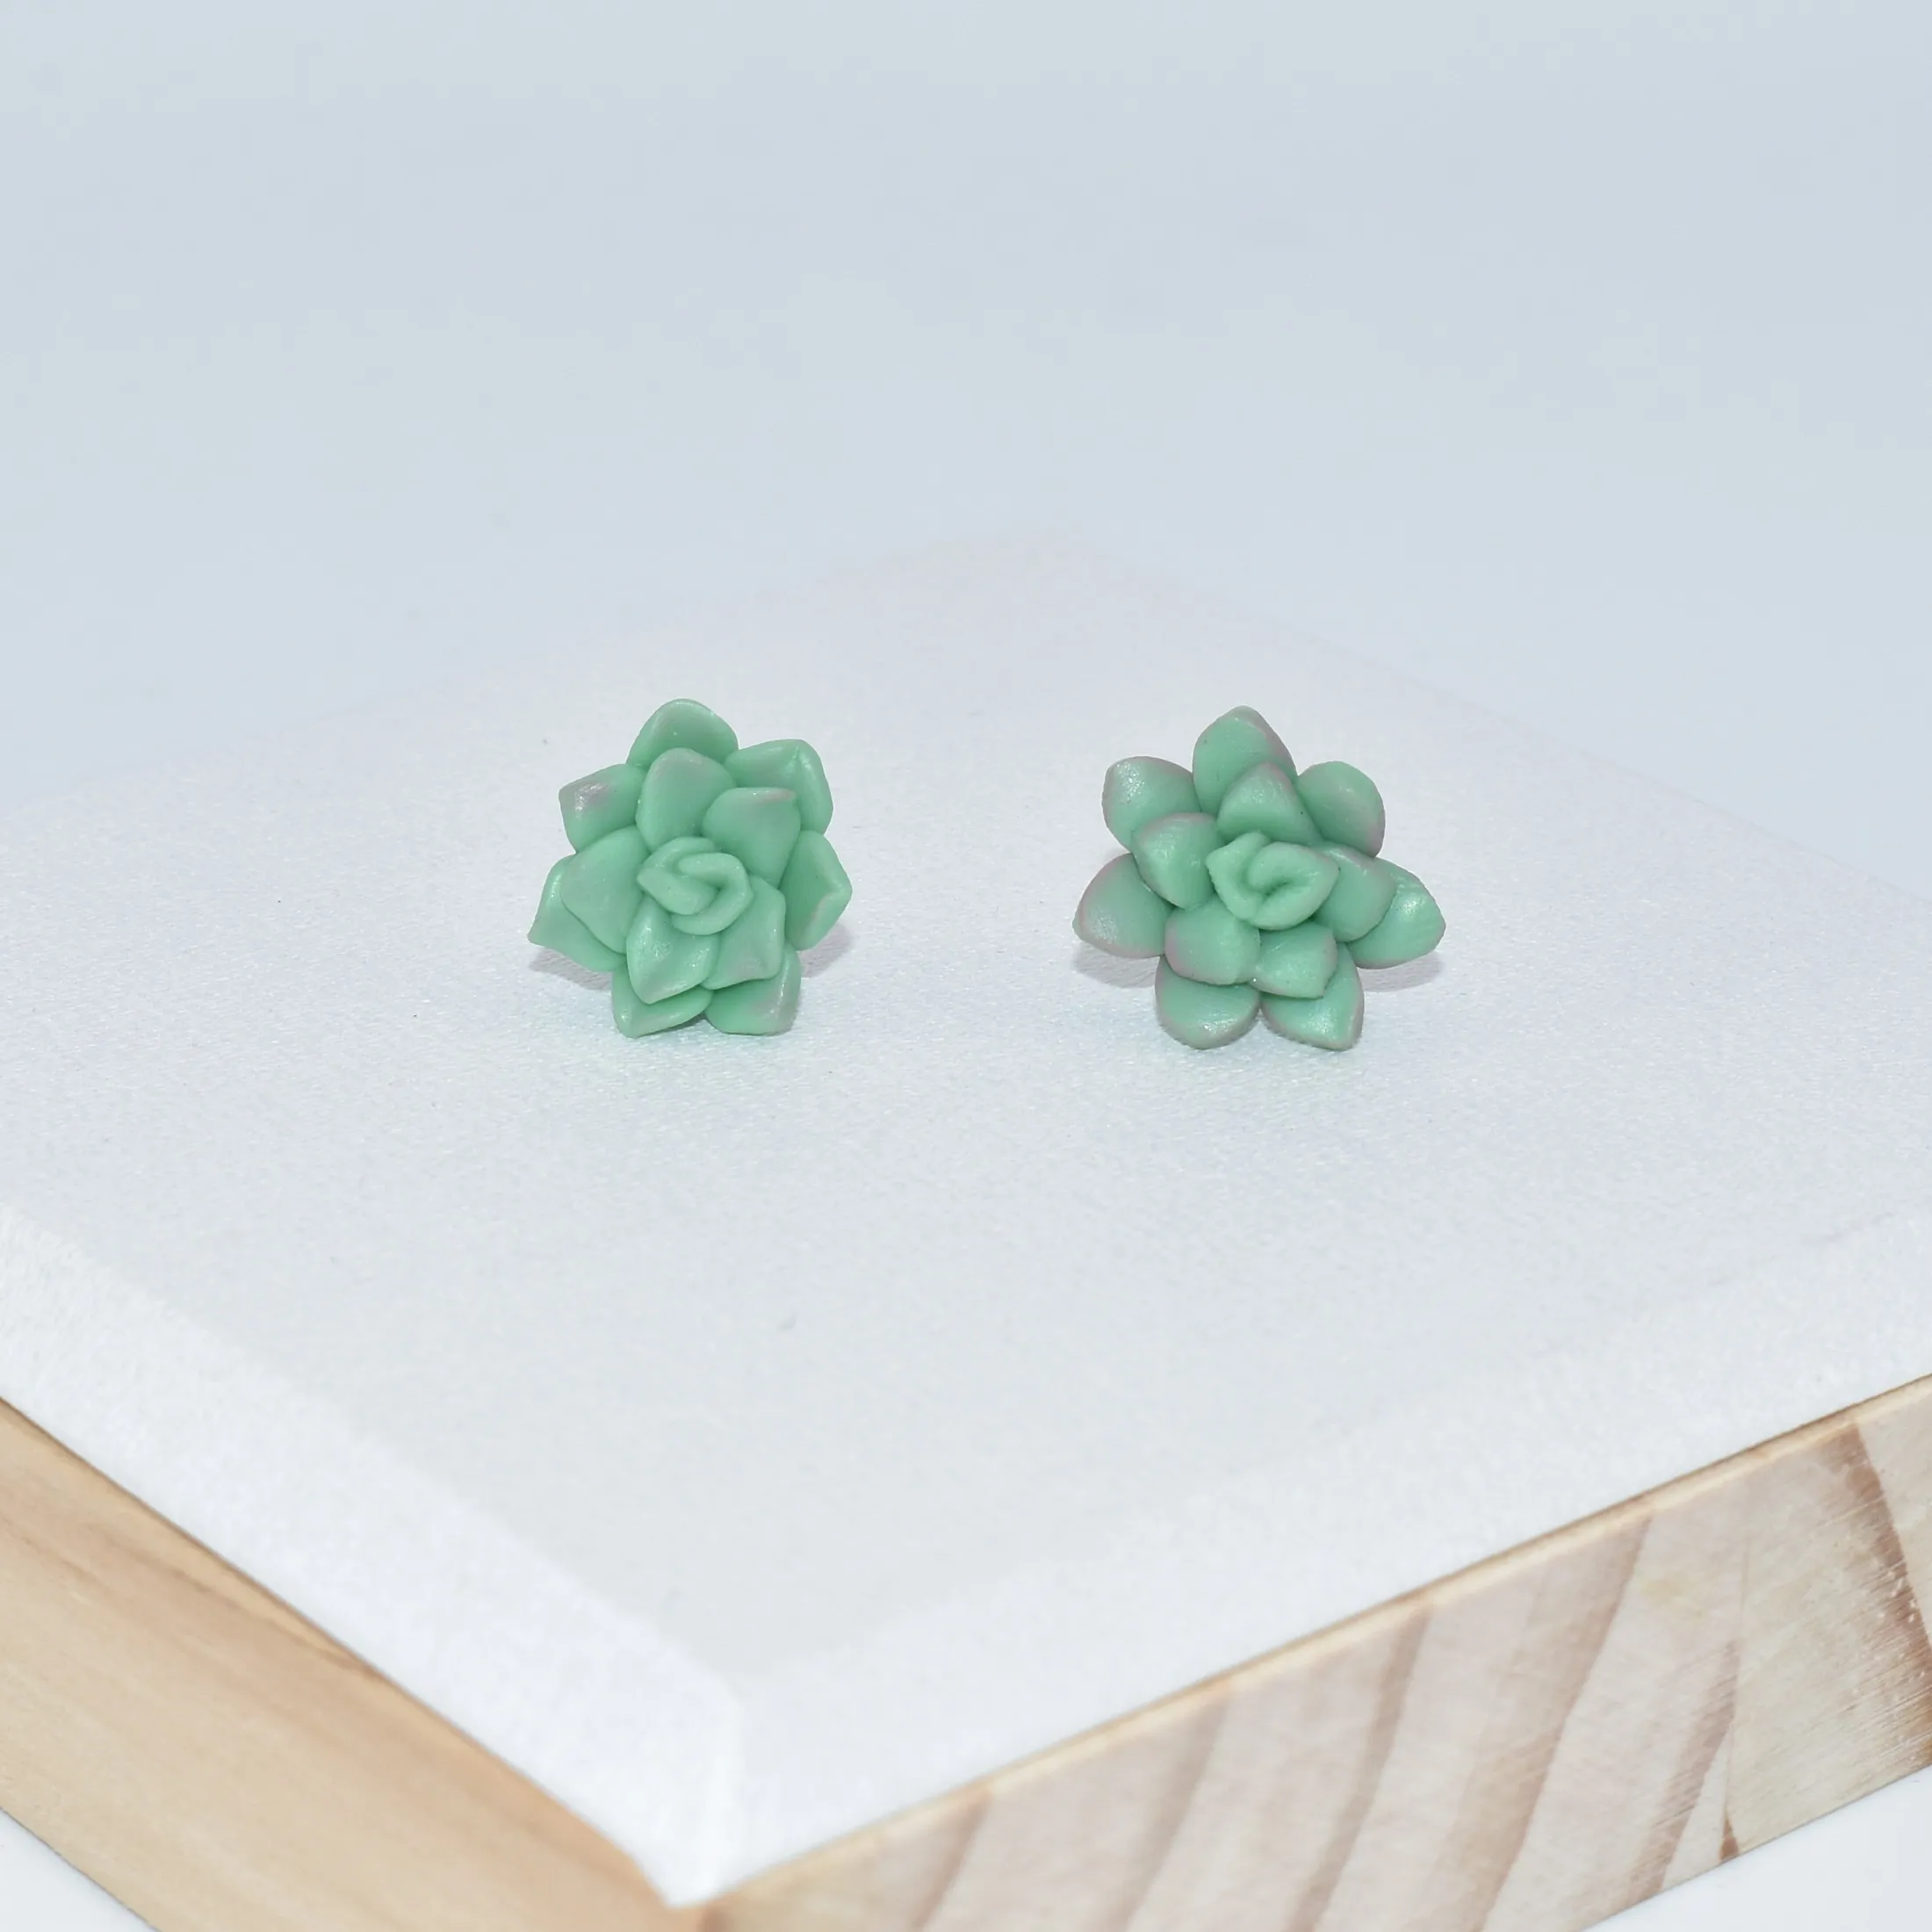 

Hot Sale Designs Hypoallergenic Stainless Steel Post Polymer Clay Succulent Plants Earrings For Women